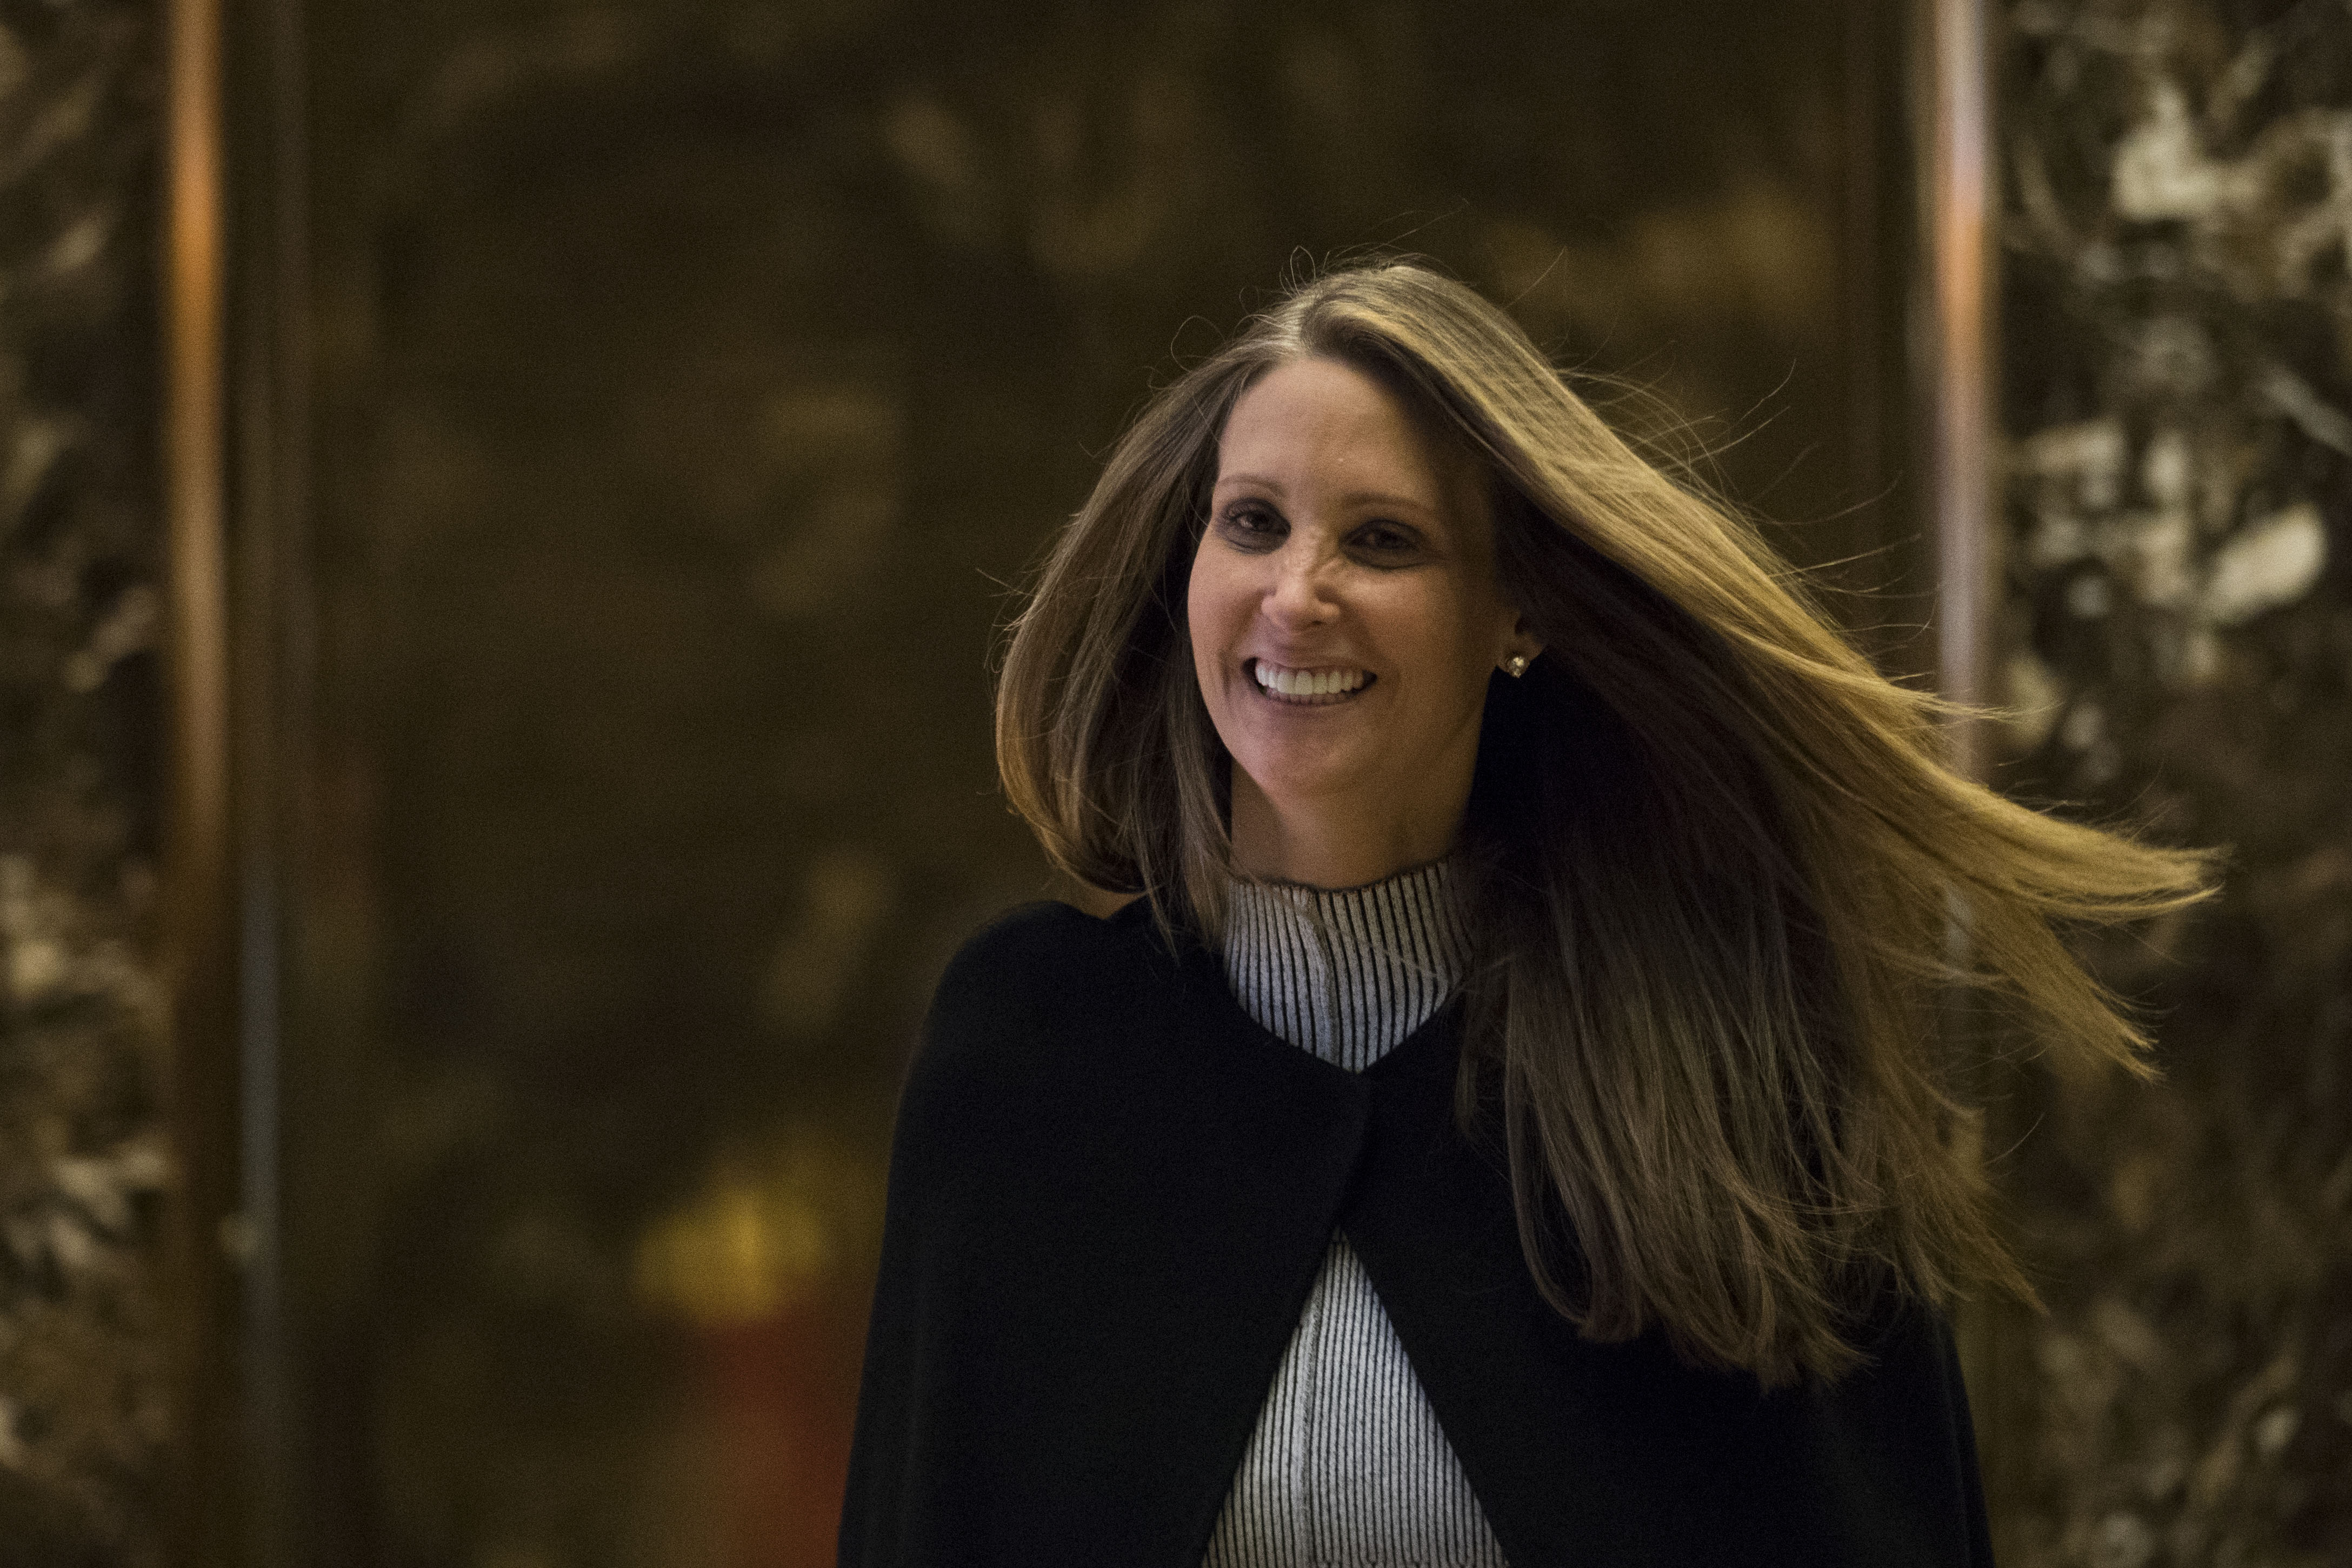 Stephanie Winston Wolkoff, who is helping plan events for events for the inauguration of President-elect Donald Trump, leaves Trump Tower, December 5, 2016 in New York City (Drew Angerer - Getty Images)